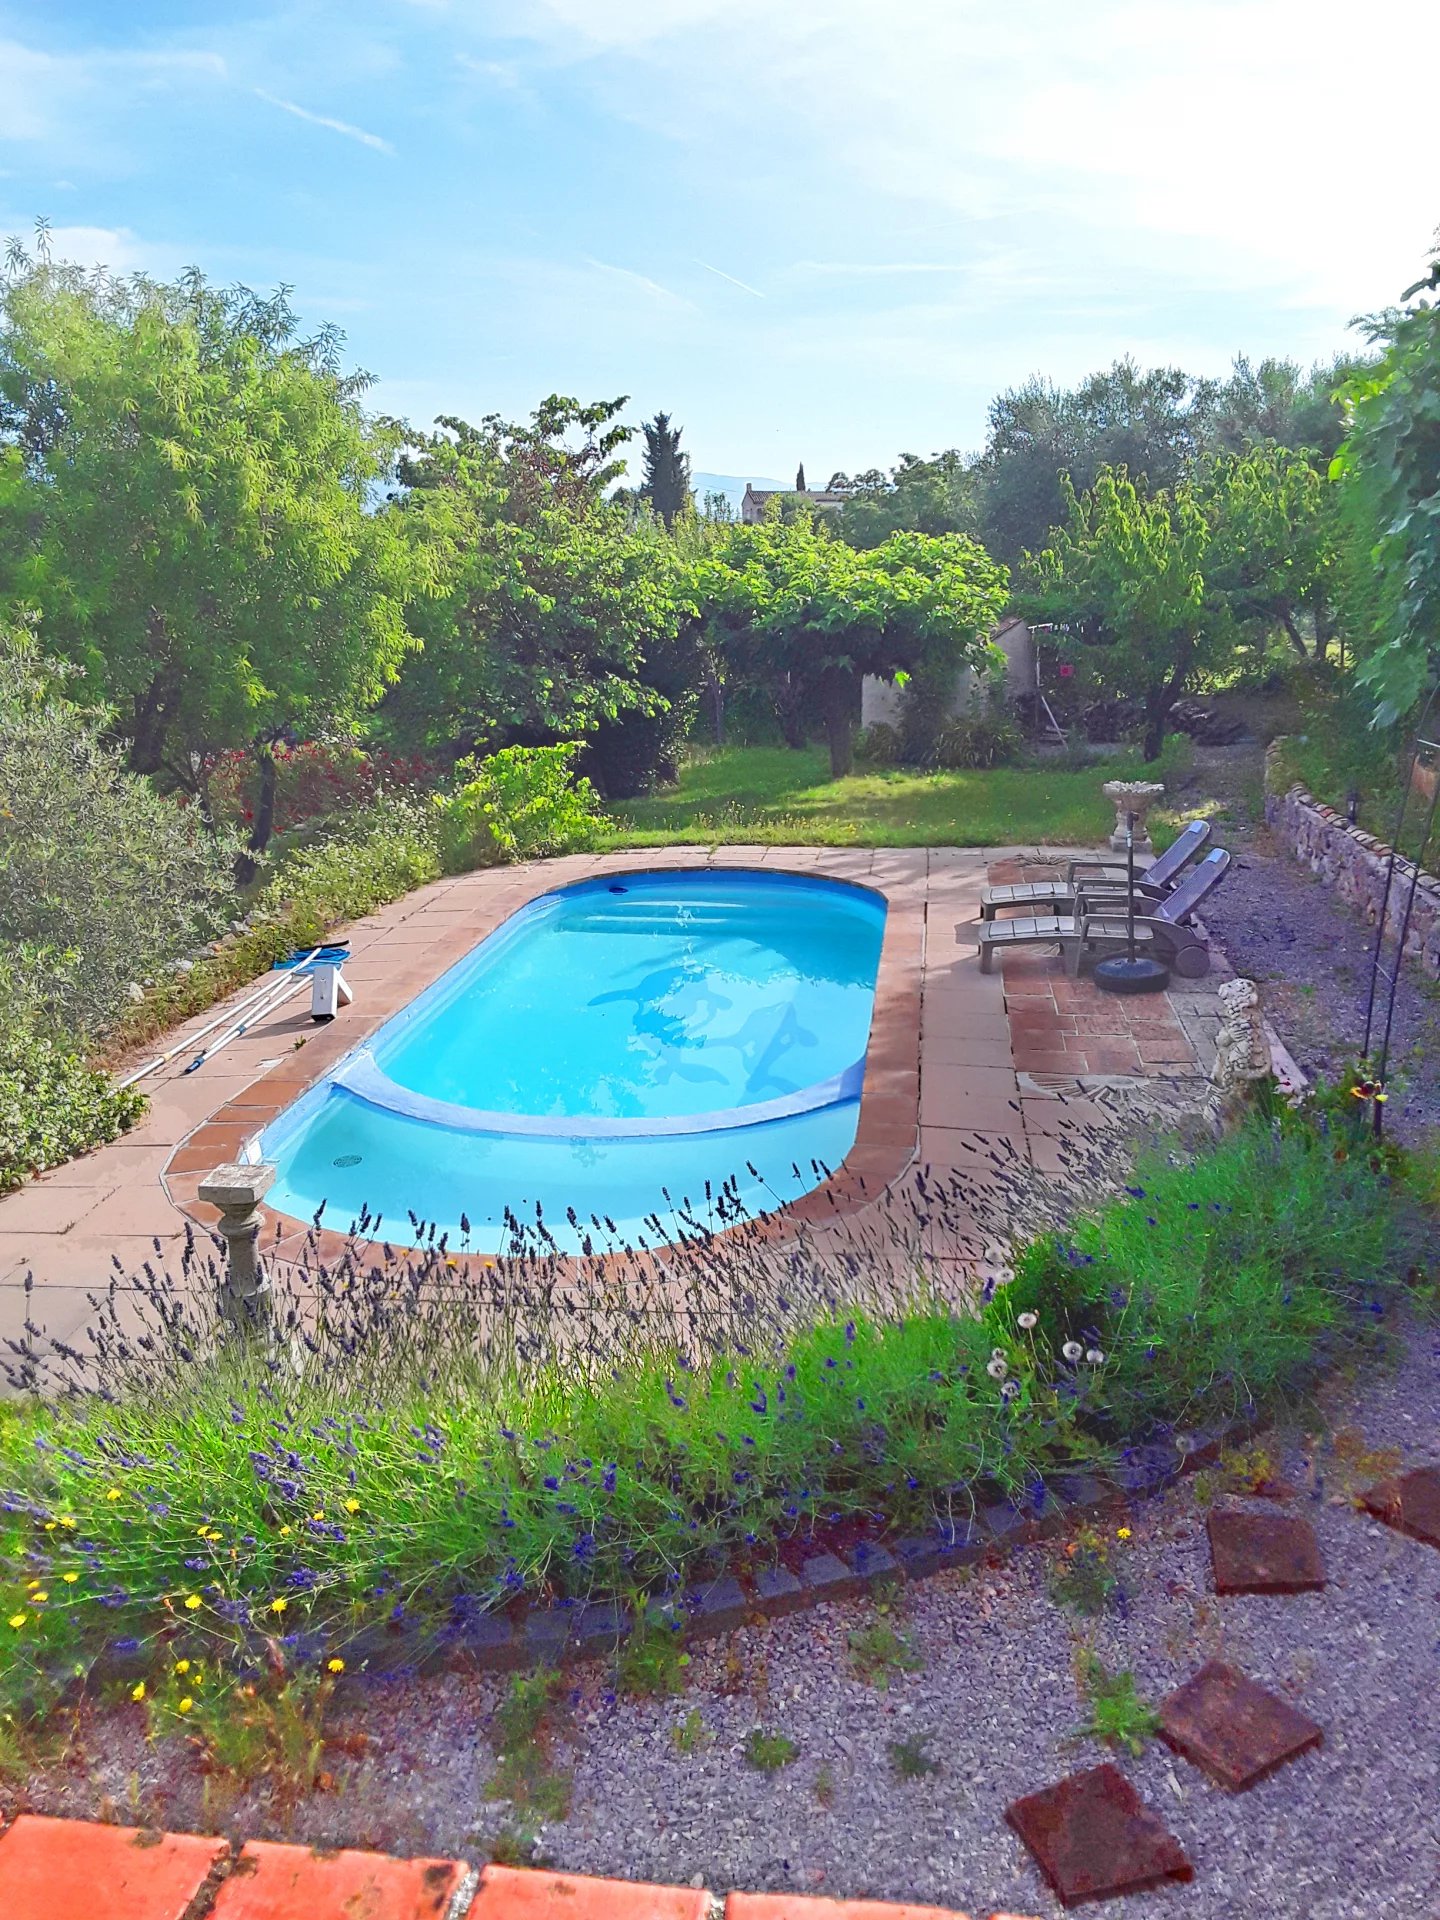 Detached villa of 155 m² with a flat garden of 800 m²